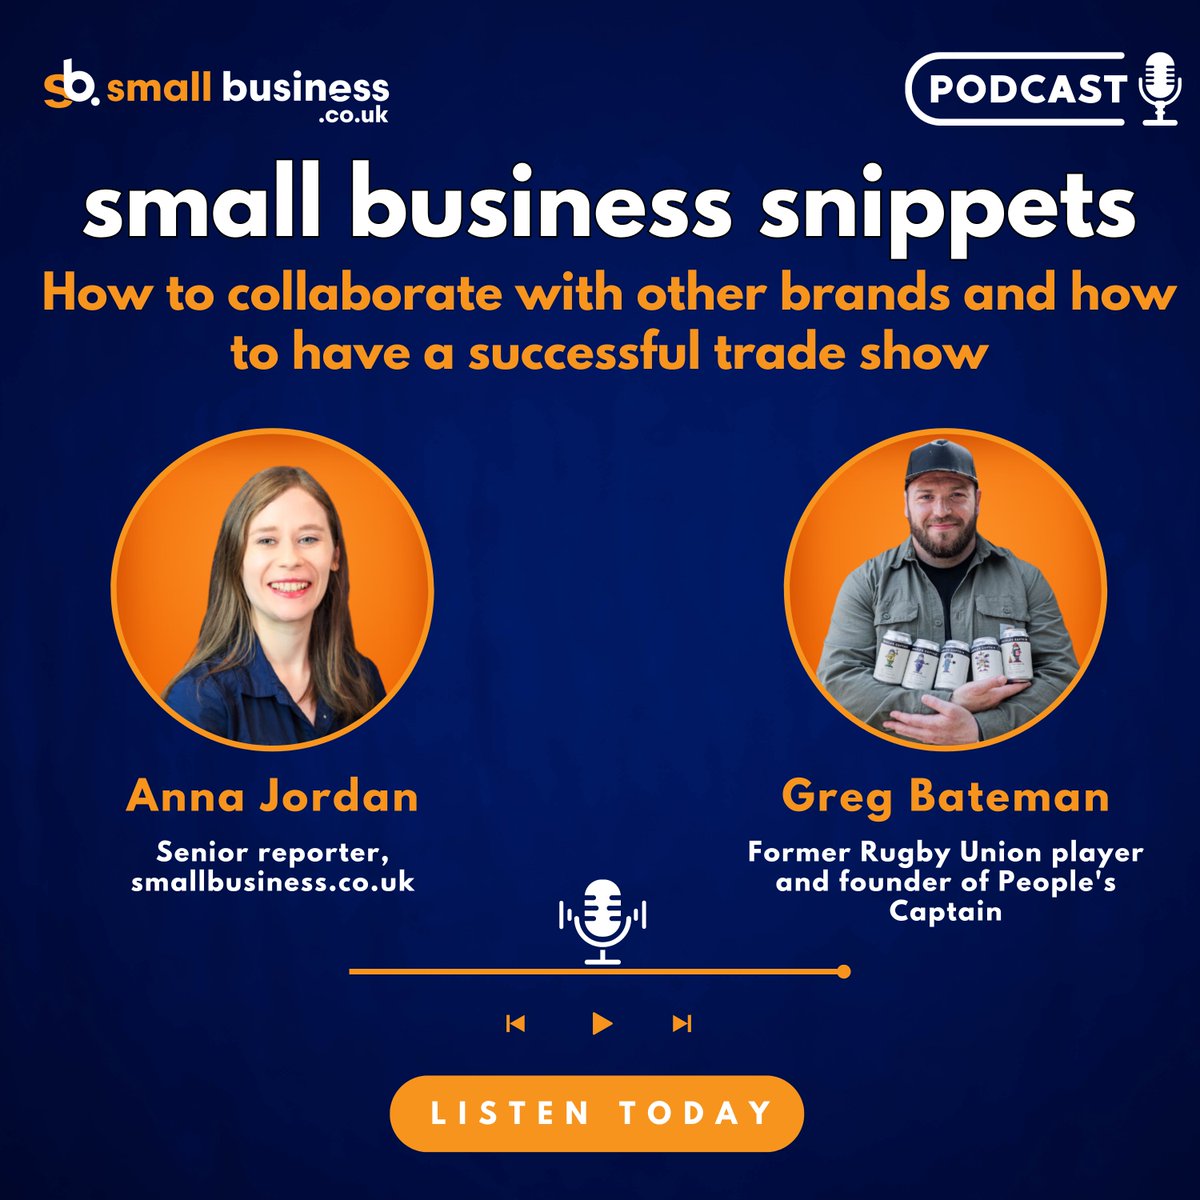 🎙️ Small Business Snippets Podcast: How to collaborate with other brands and how to have a successful trade show Learn how to forge strong partnerships with other brands. smallbusiness.co.uk/greg-bateman-r… #SBSPodcast